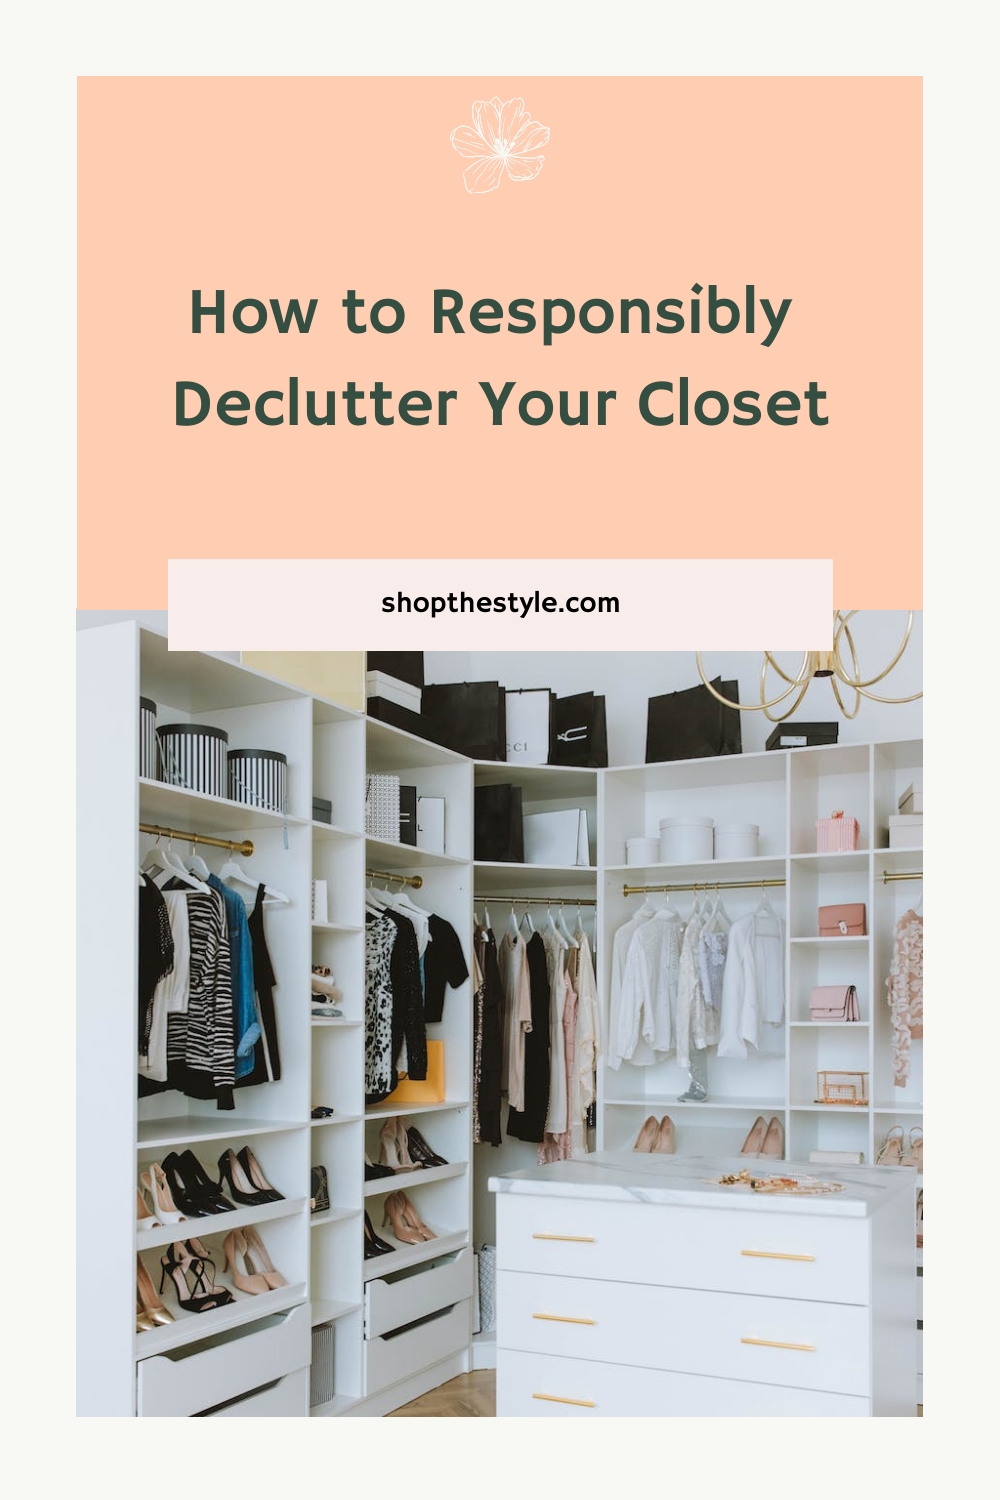 How to Responsibly Declutter Your Closet